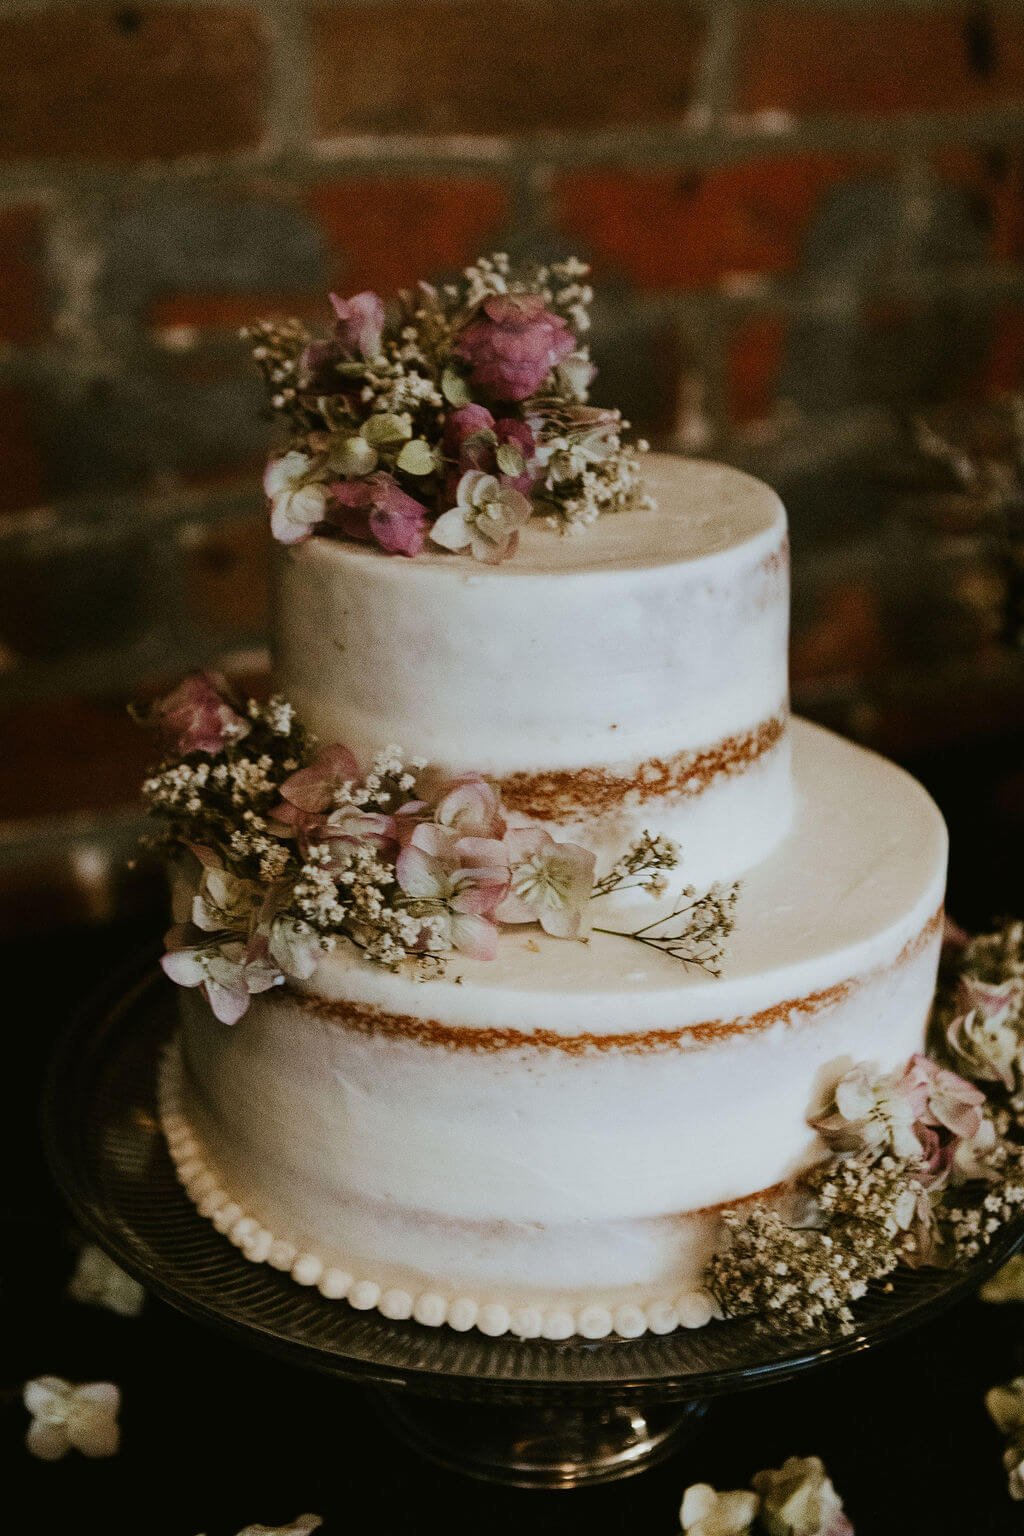 White wedding cake with floral arrangement on top